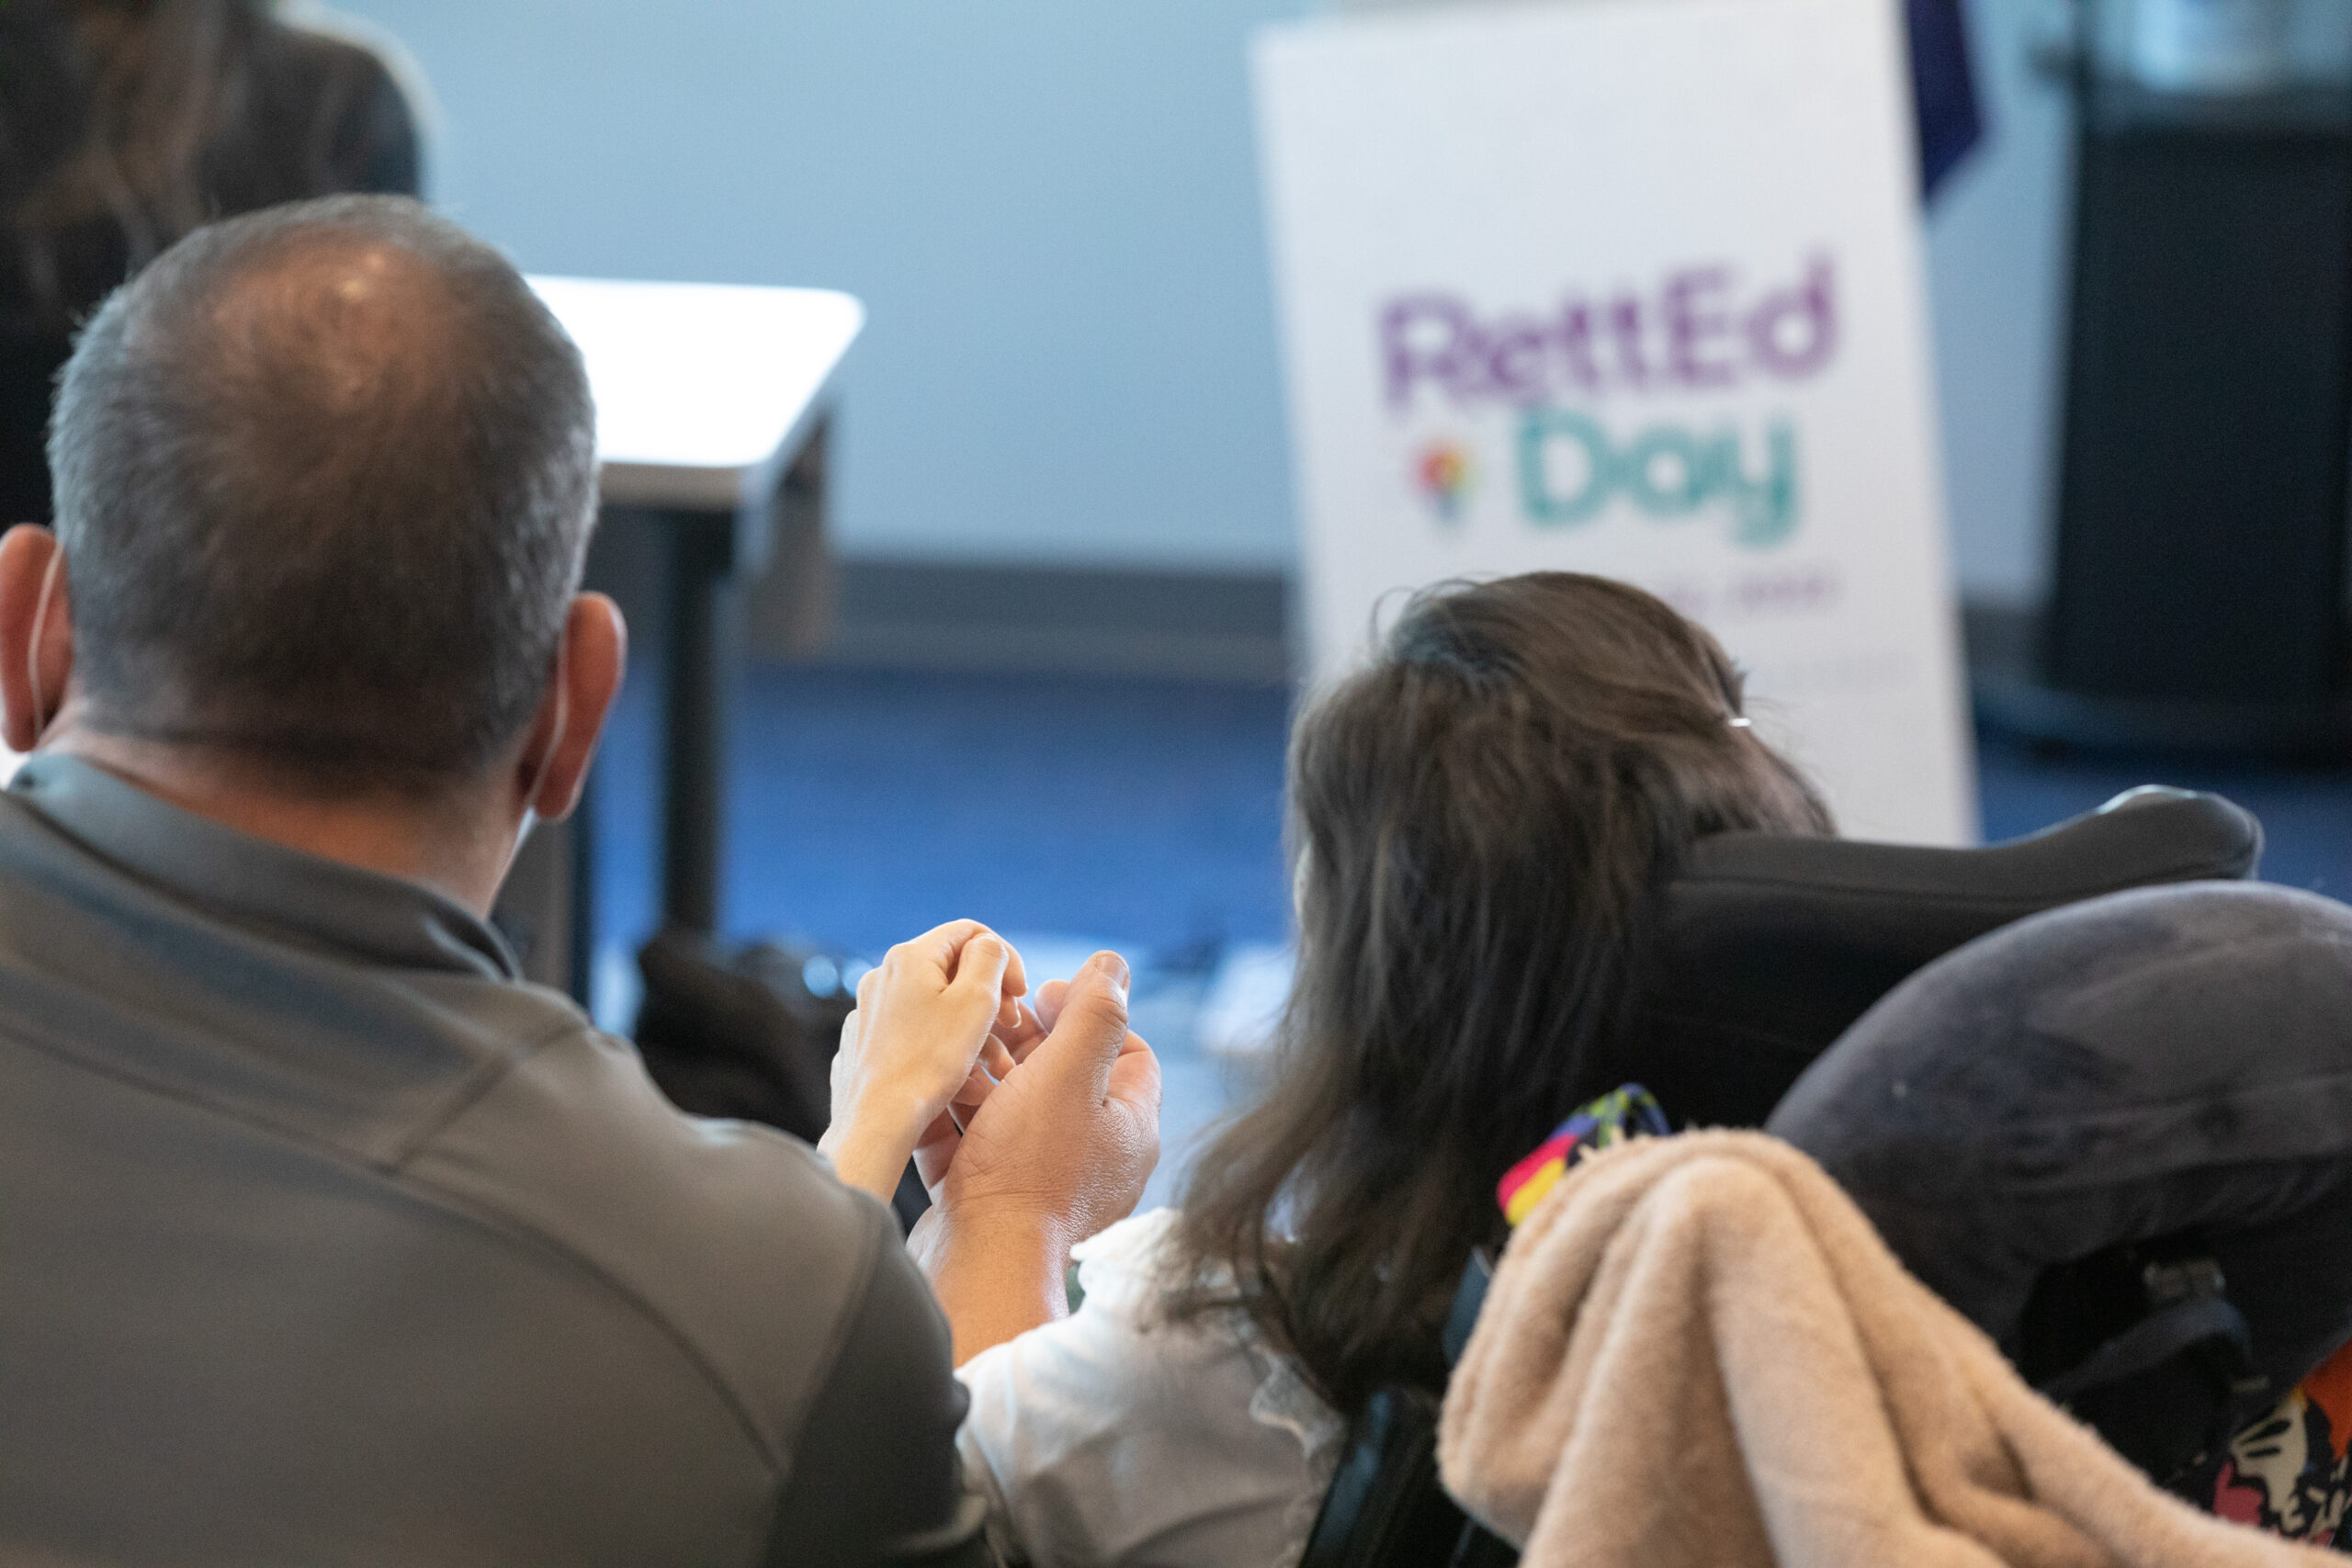 RettEd Day Attendee 2022